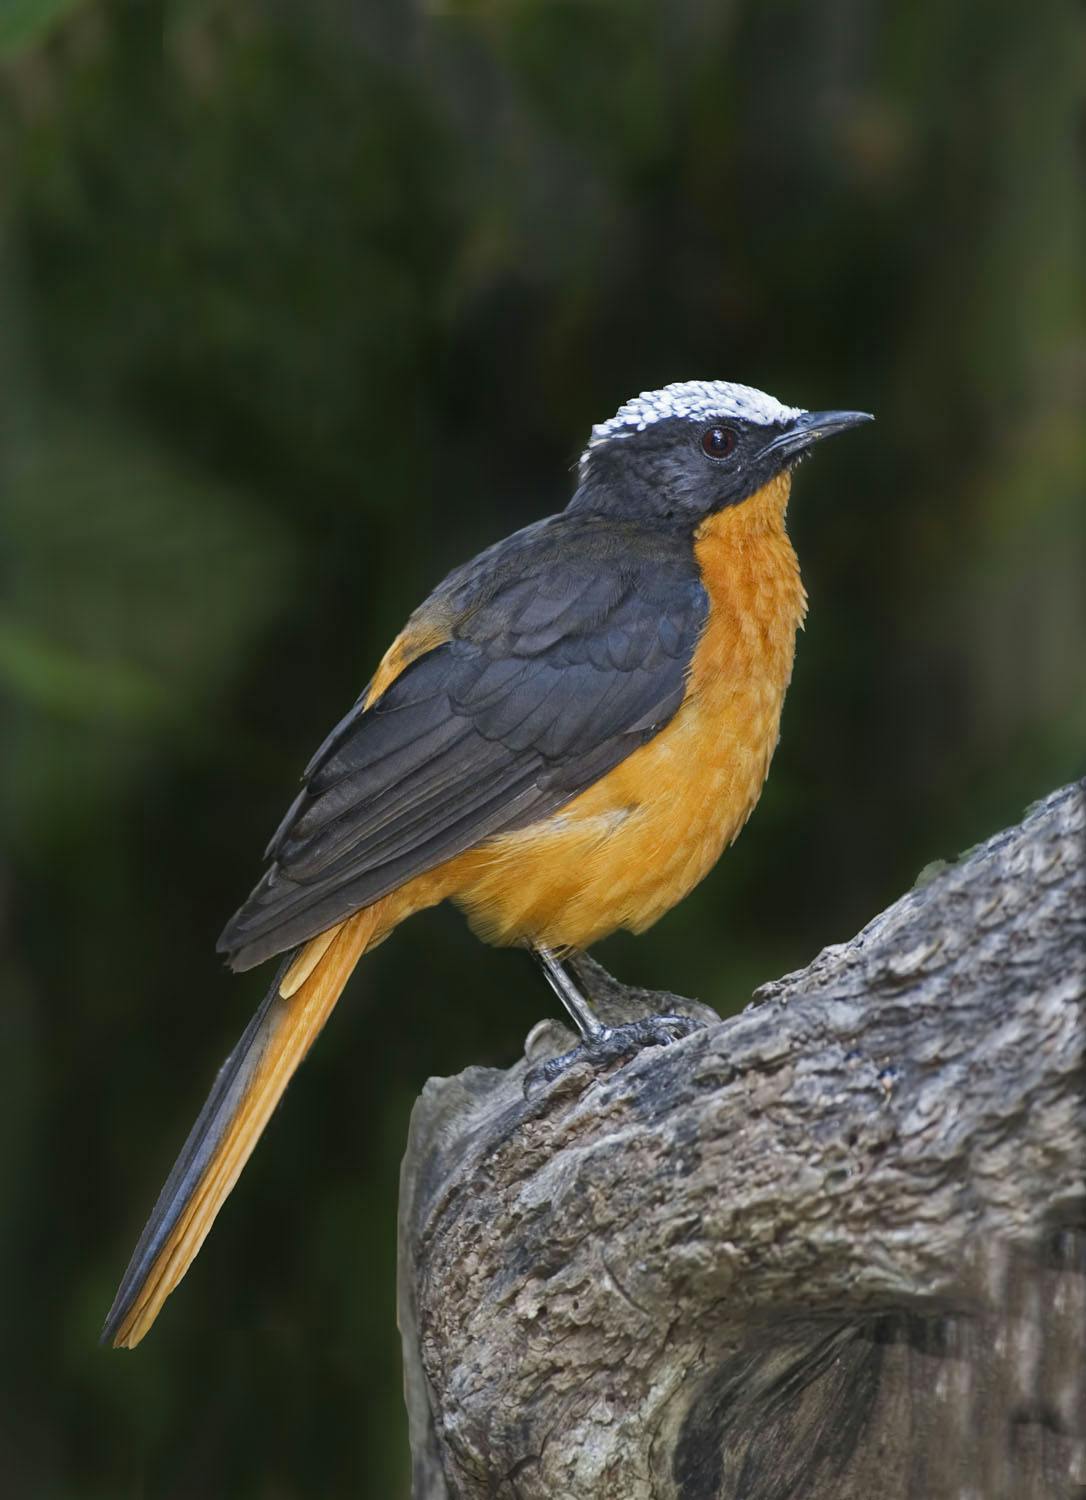 white-crowned robin-chat